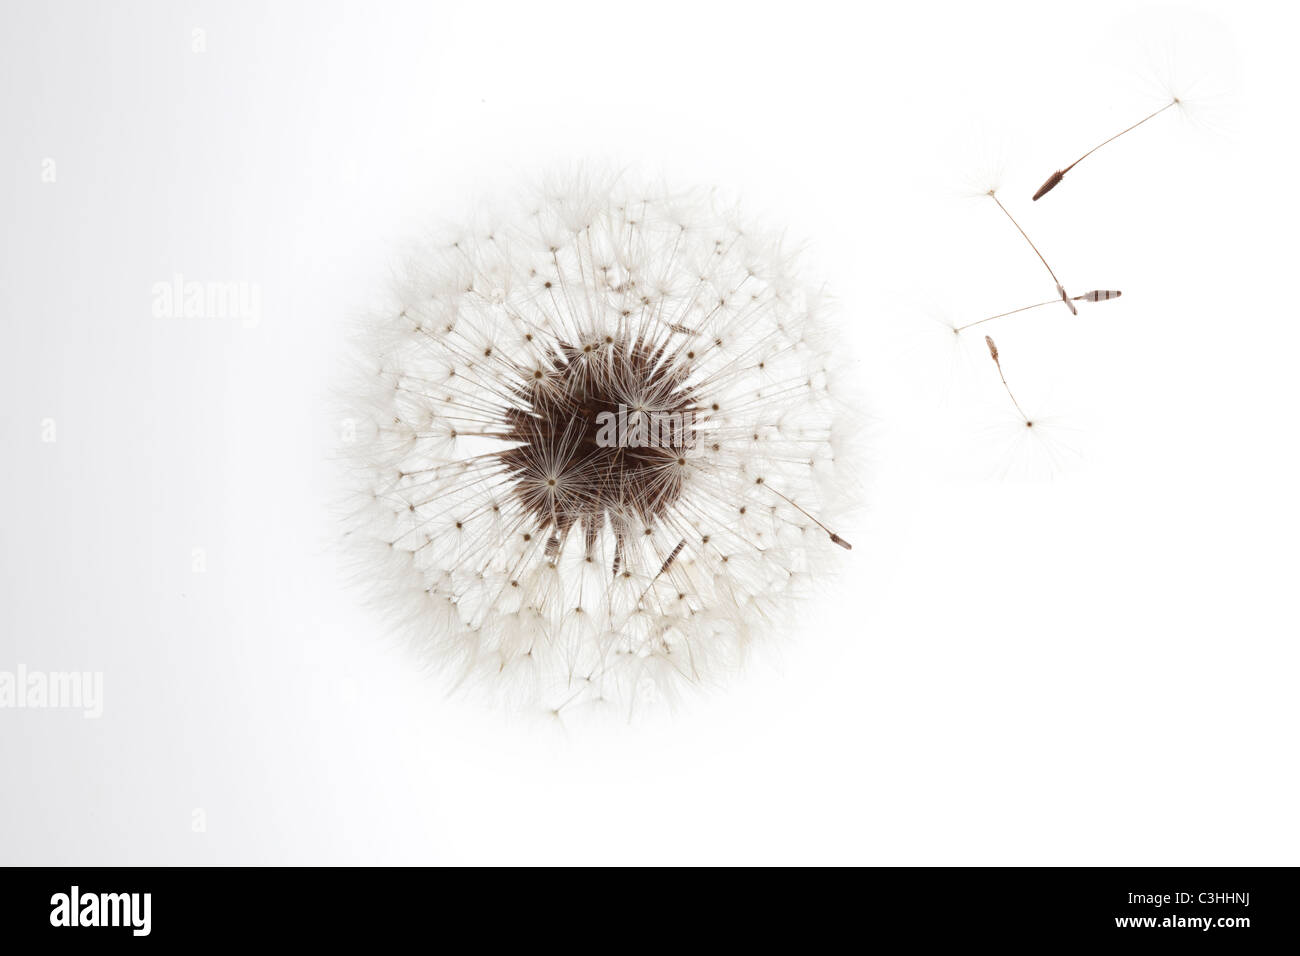 Dandelion on white with seeds blowing away Stock Photo